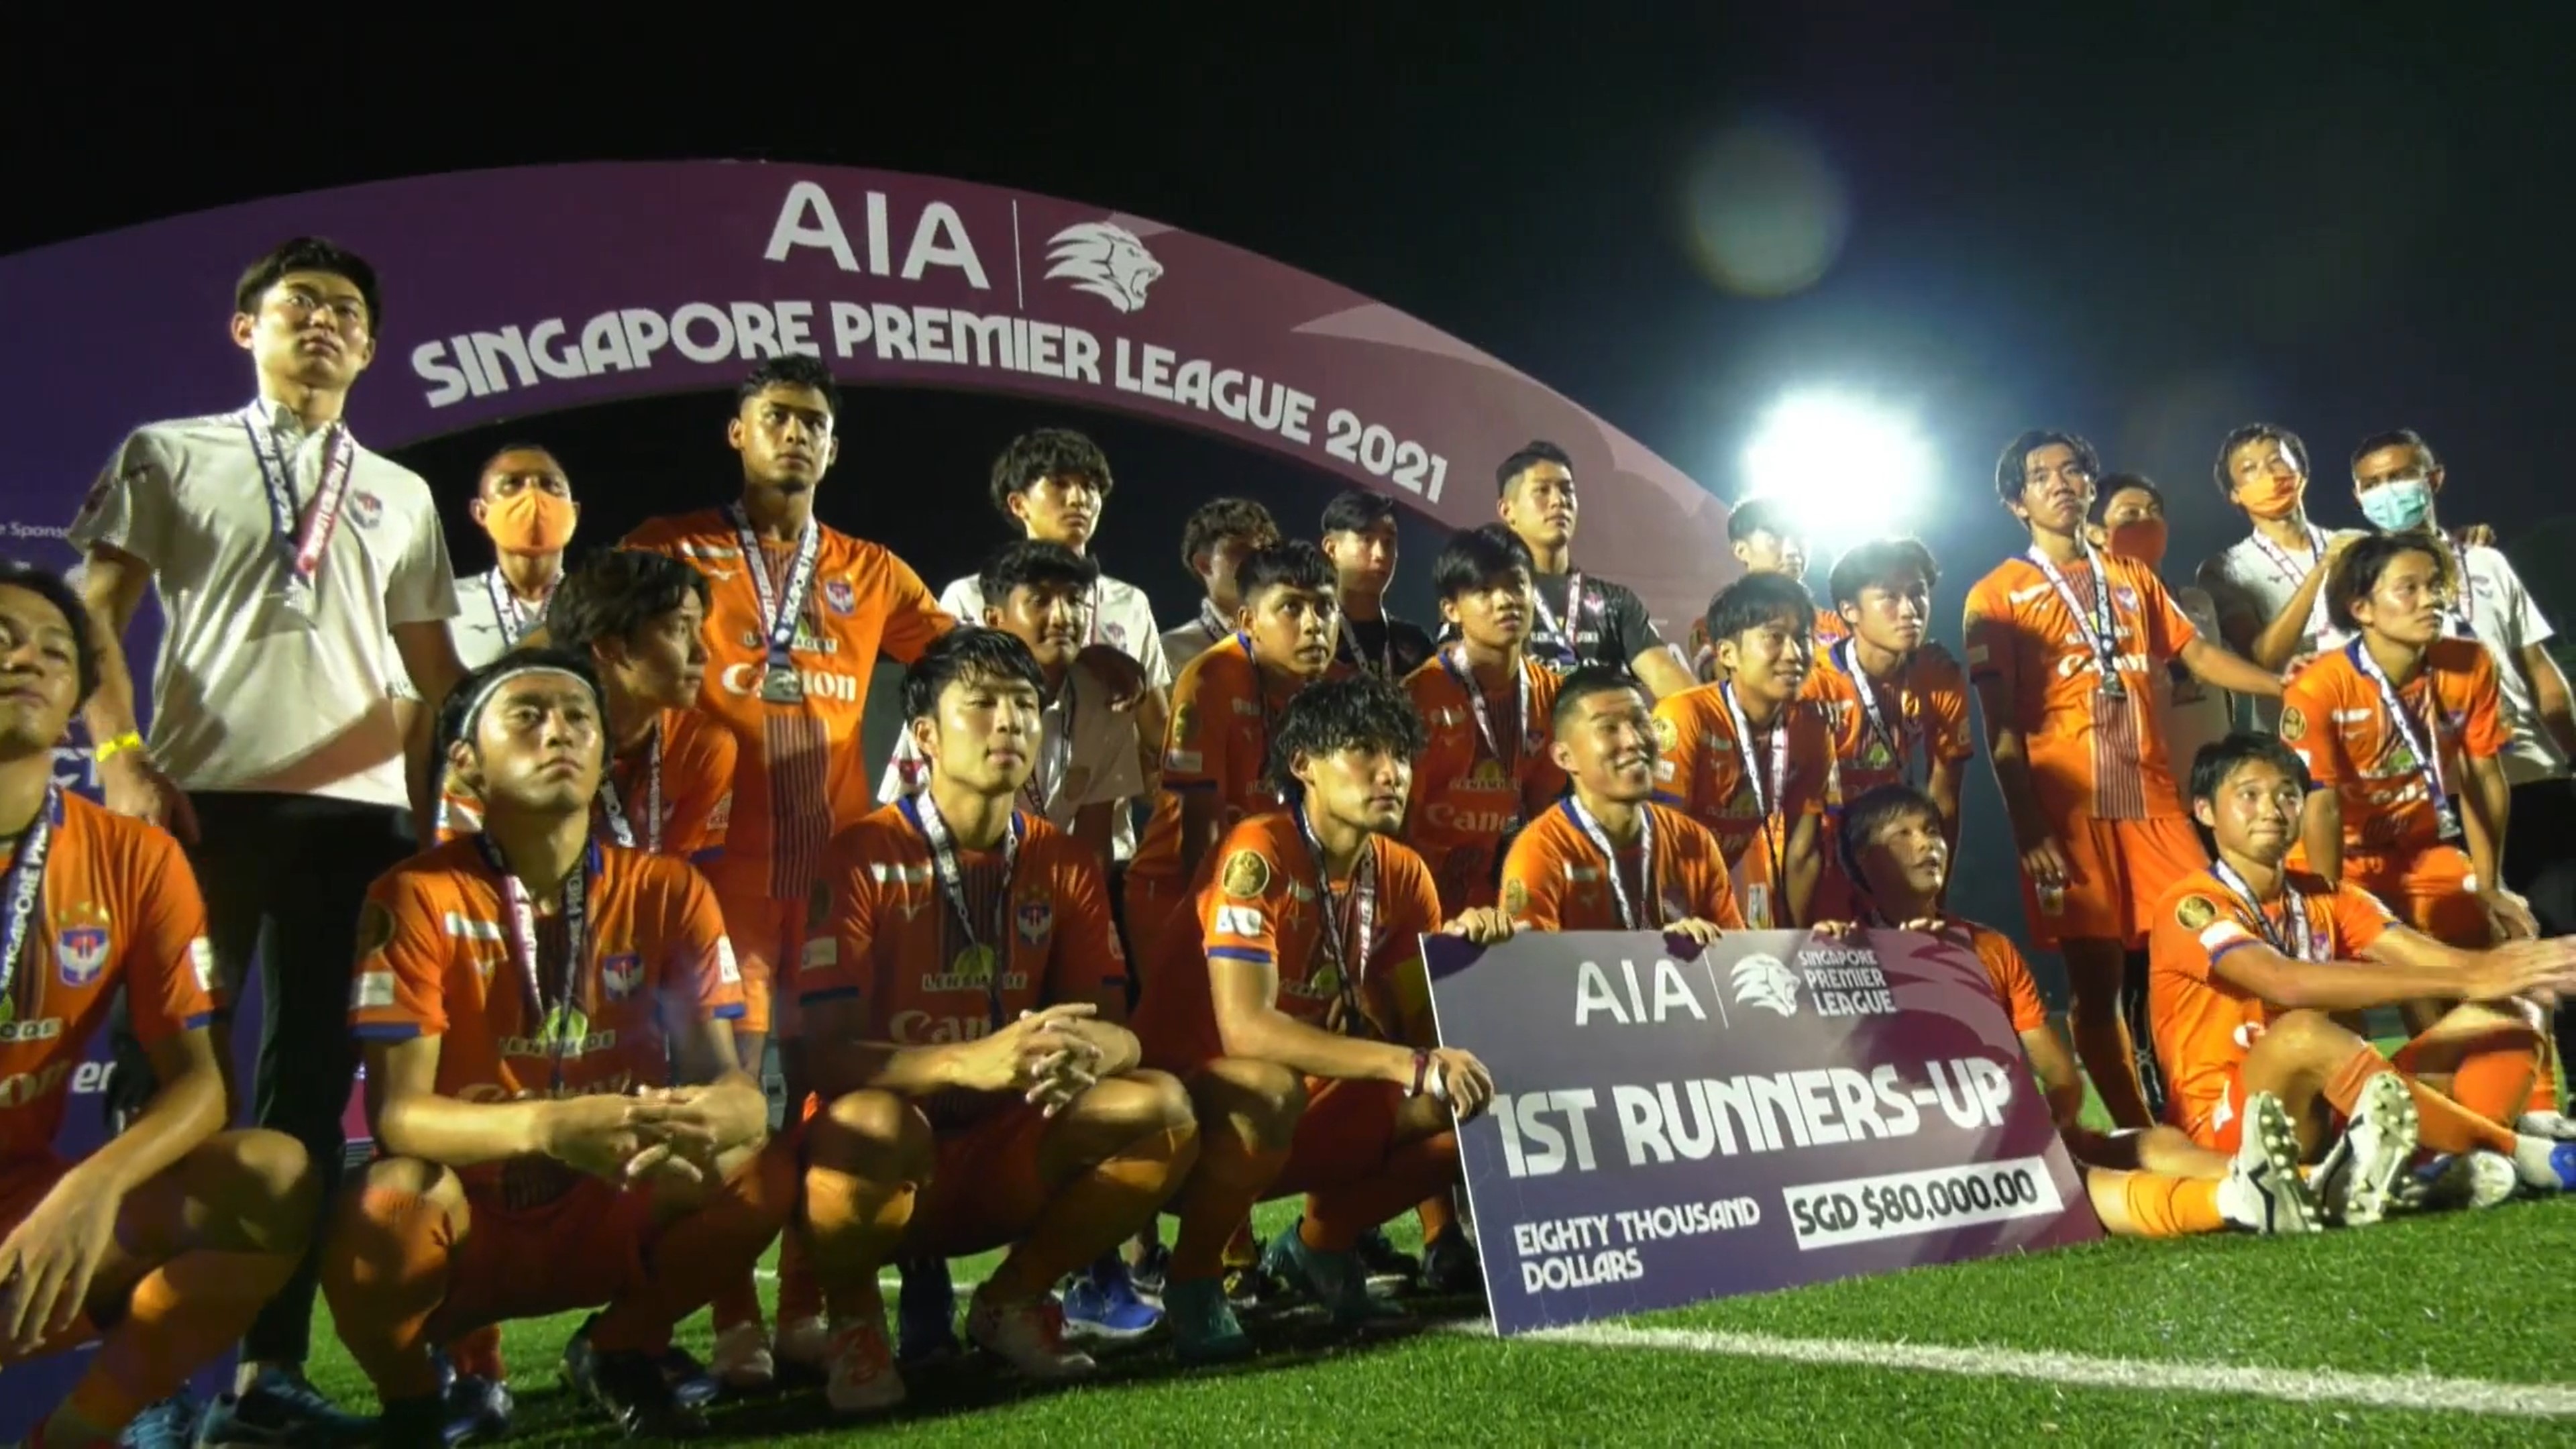 SPL : An 8-goal thriller led to Albirex Niigata's downfall in final game of the season!